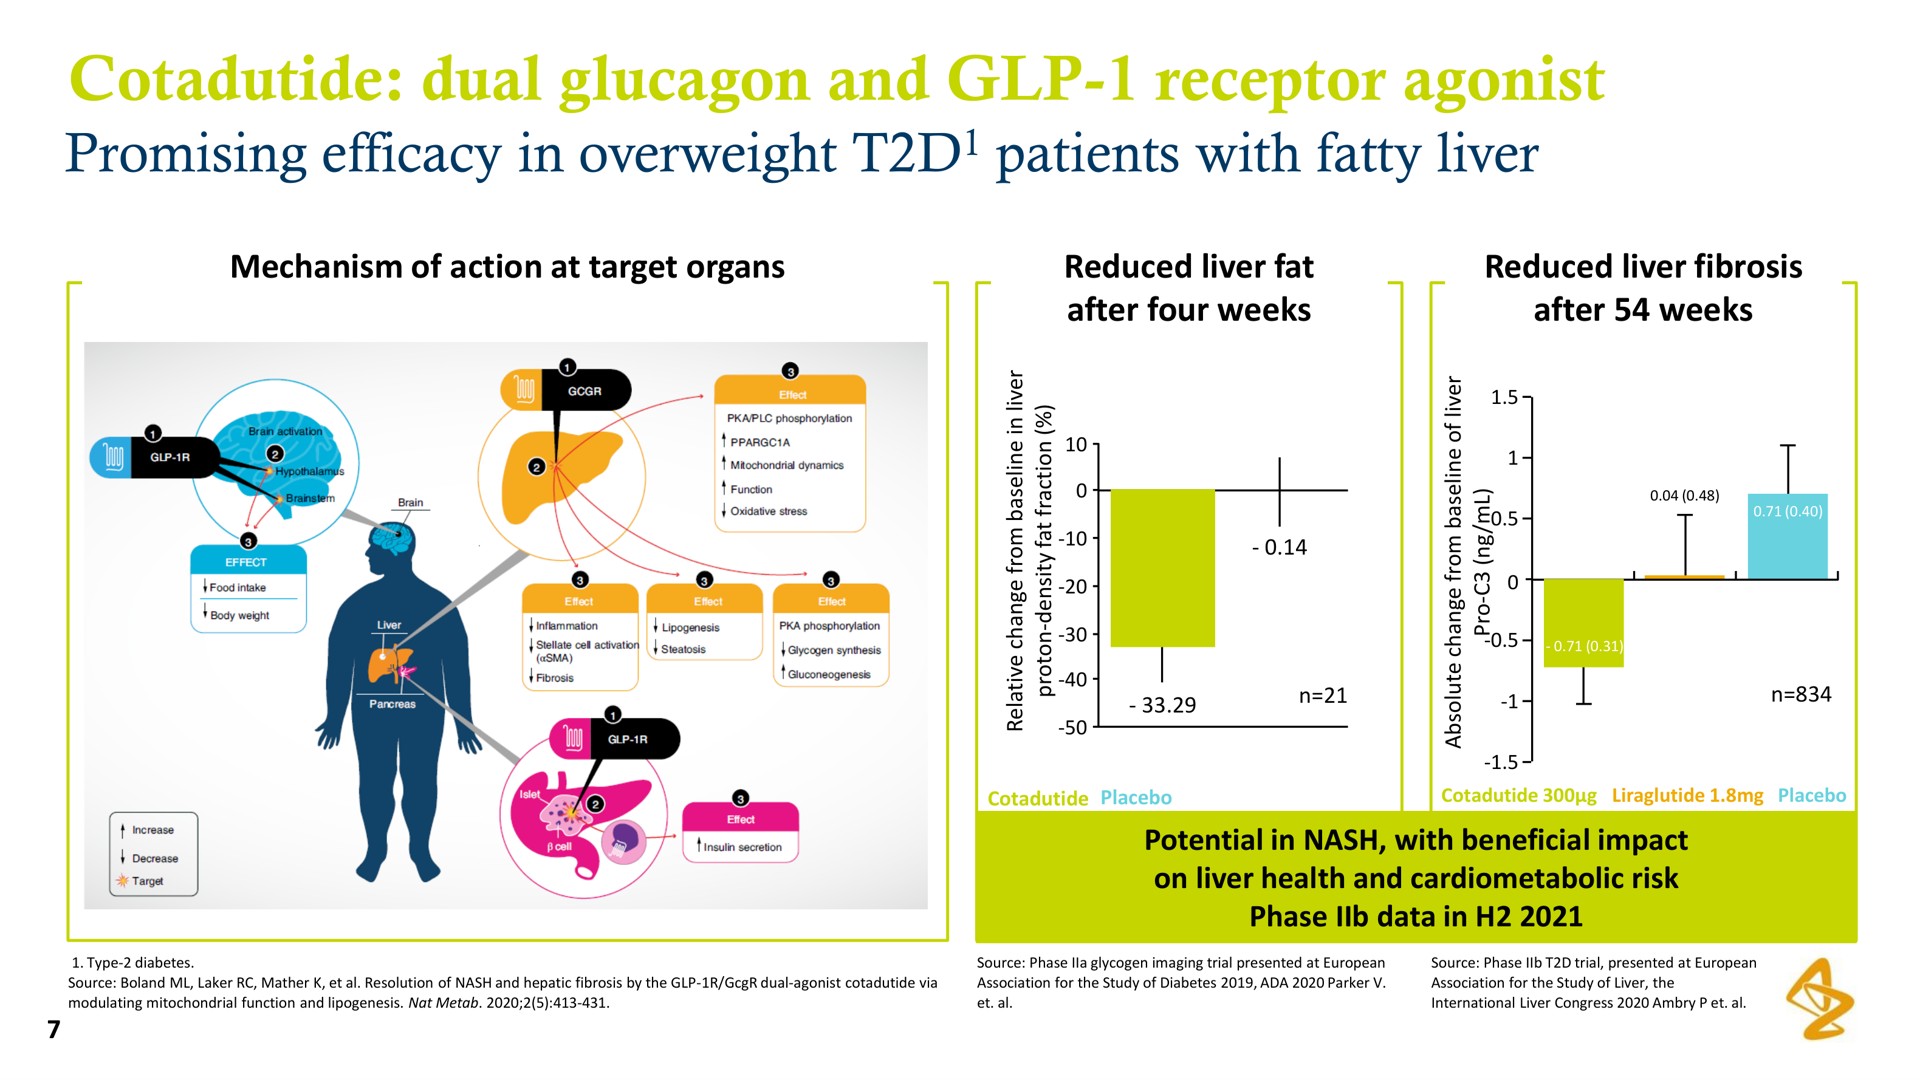 dual and receptor agonist promising efficacy in overweight patients with fatty liver | AstraZeneca